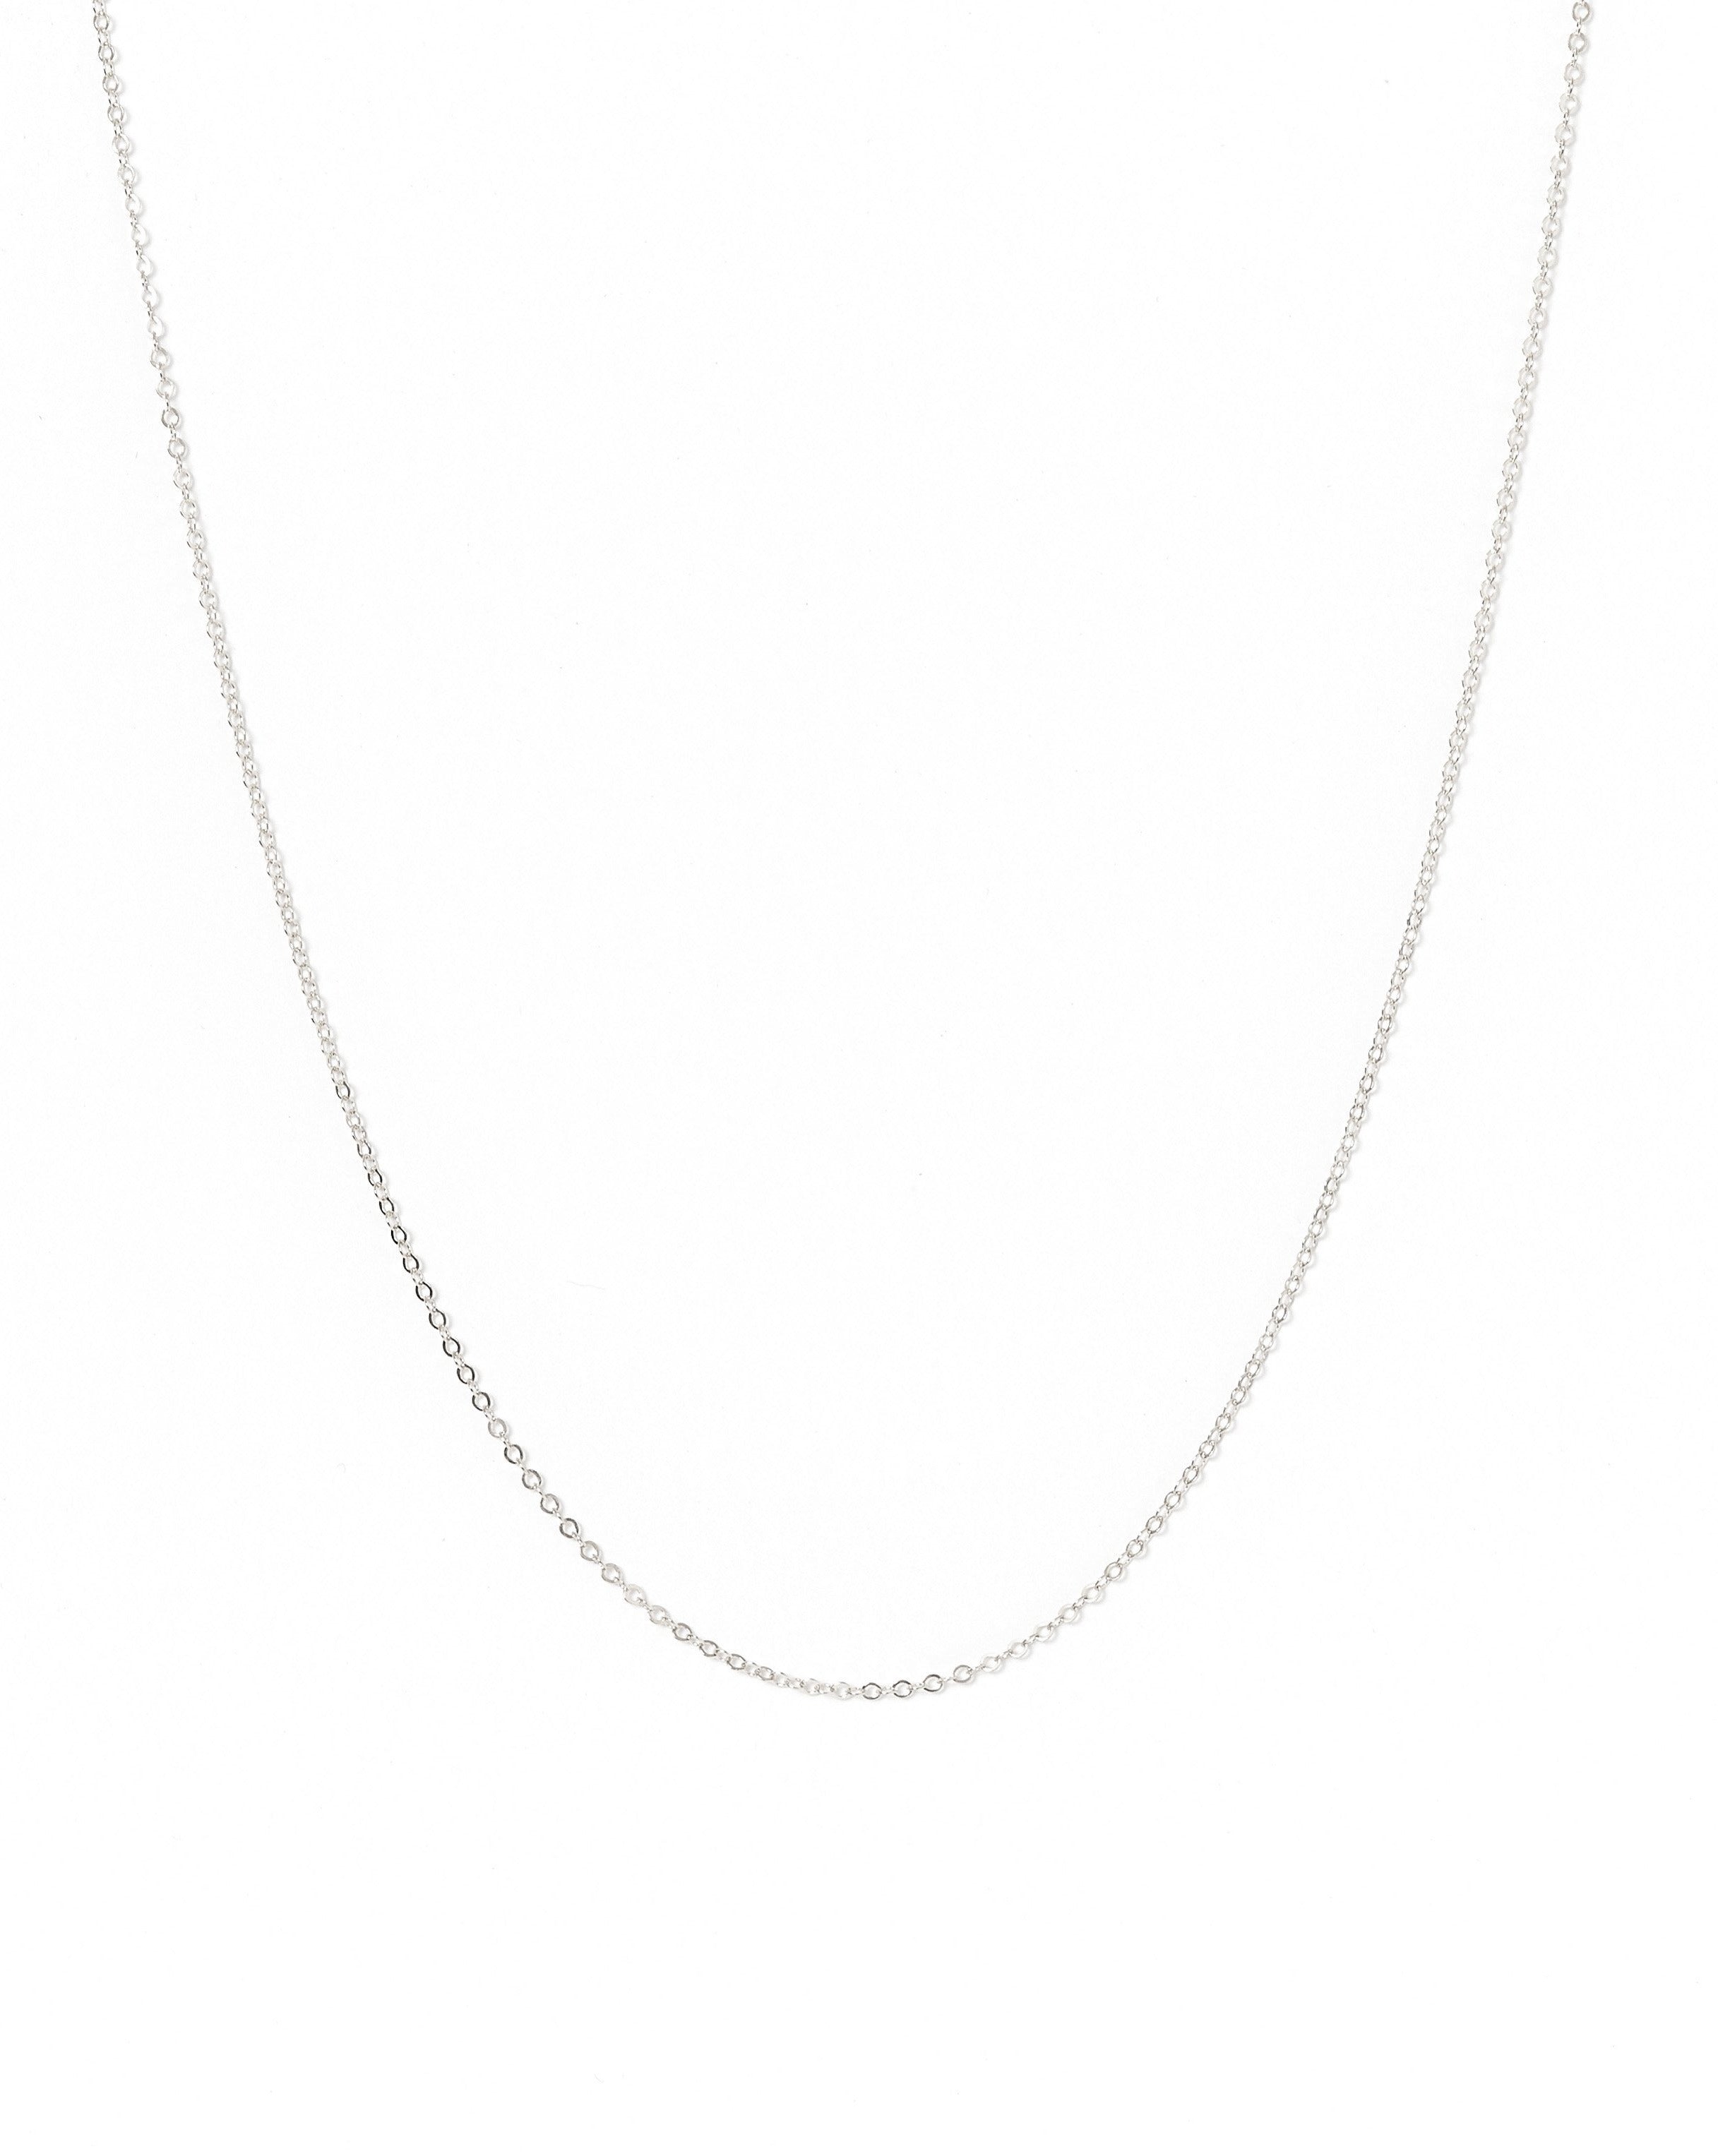 Silver Chain by KOZAKH. A handcrafted minimalist necklace crafted in Sterling Silver, and is available in 4 adjustable lengths.